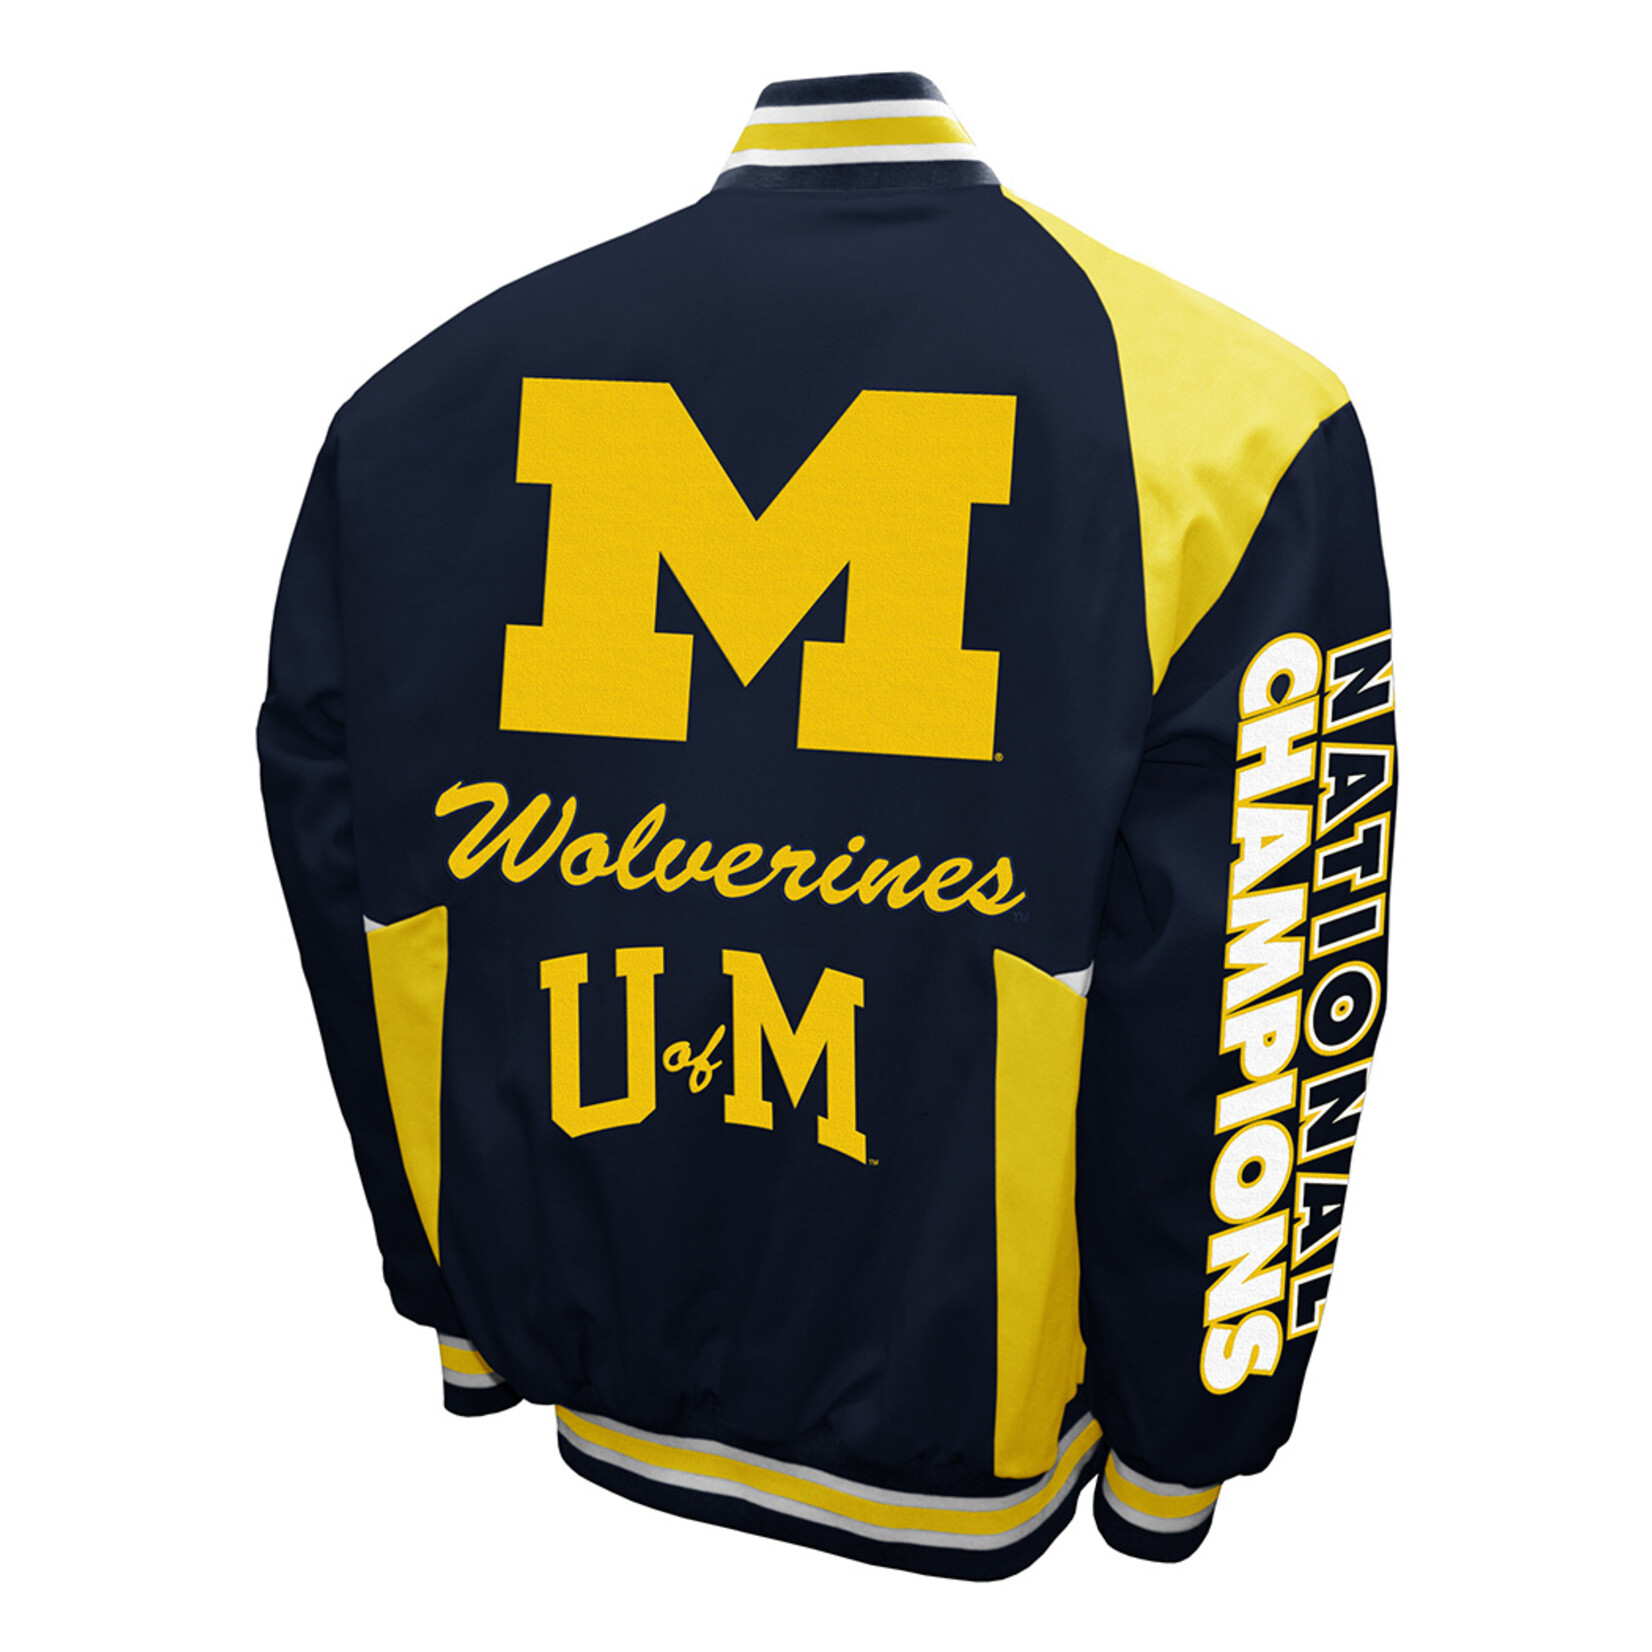 Franchise Club Michigan Wolverines College Football Playoff 2023 National Champions Stout Twill Full-Snap Jacket